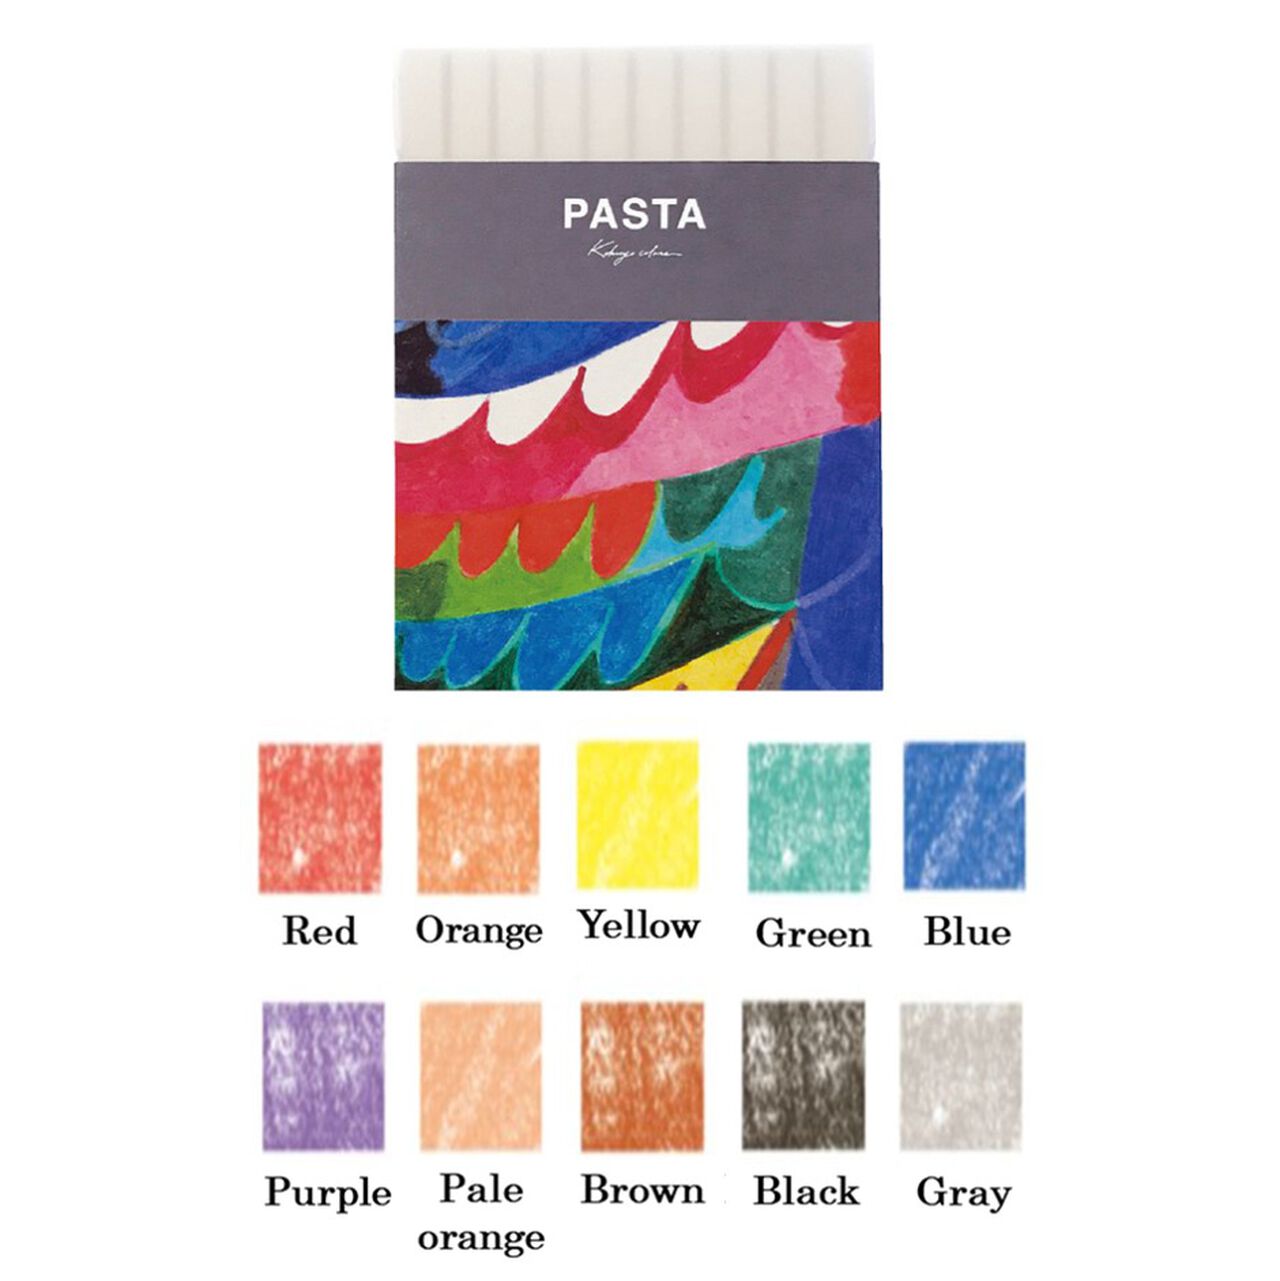 PASTA MARKER (MULTIPLE COLORS) — by Kokuyo – Paperole